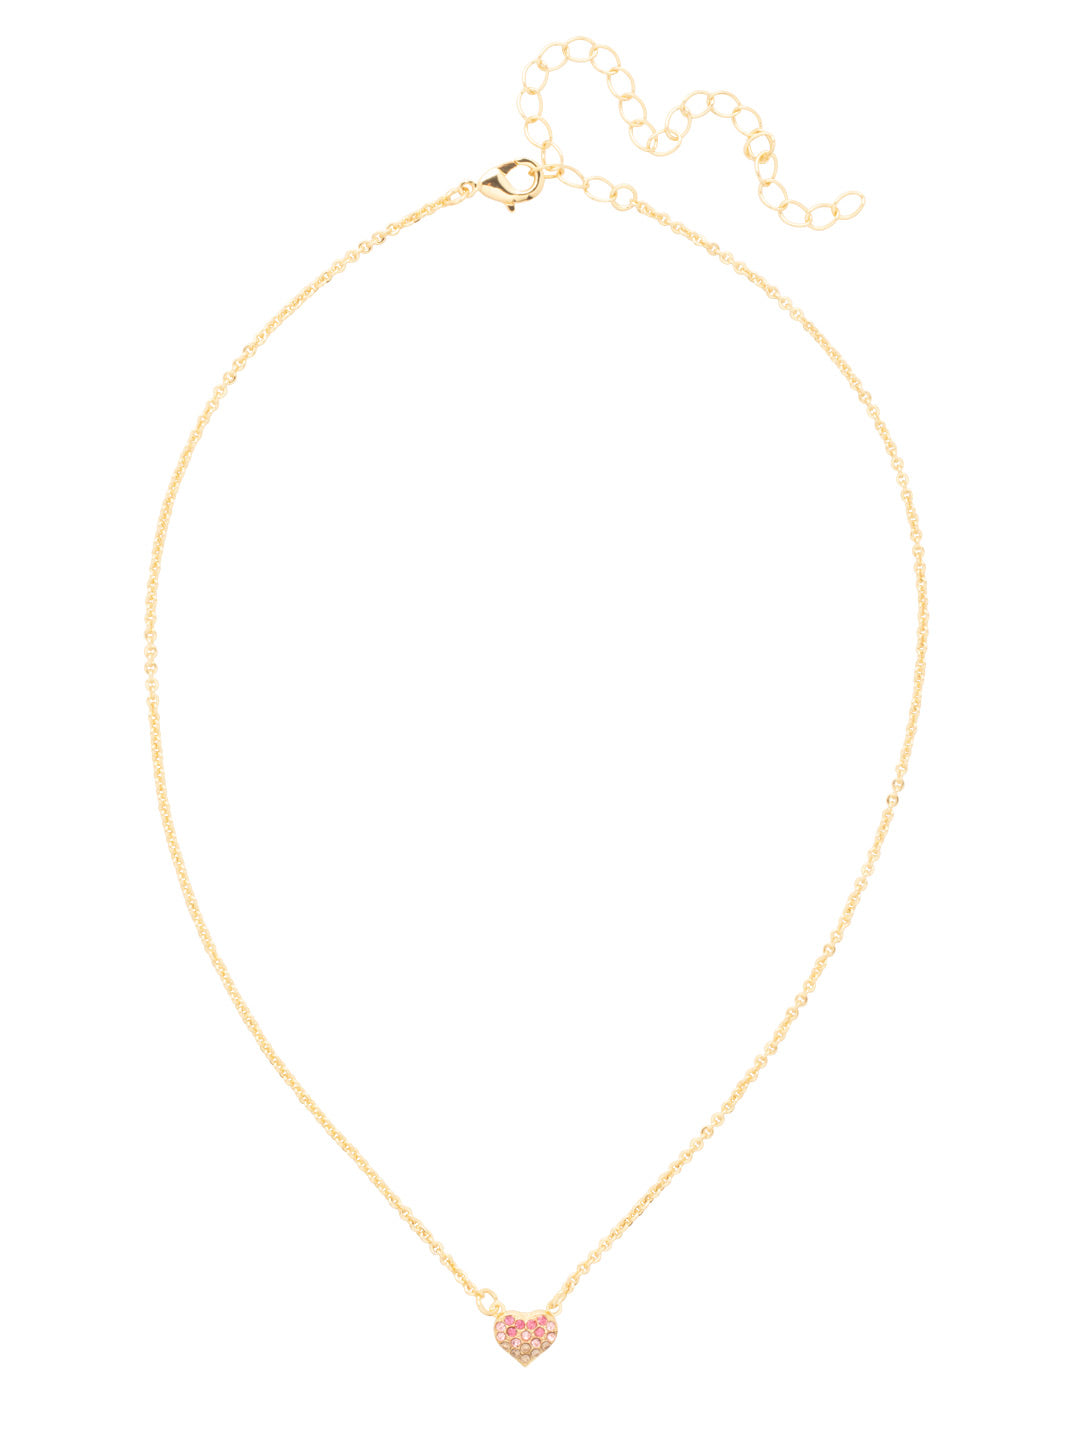 Mini Pave Heart Pendant Necklace - NFN2BGBFL - <p>The Mini Pave Heart Pendant Necklace features a single crystal-embellished heart pendant on an adjustable chain, secured with a lobster claw clasp. From Sorrelli's Big Flirt collection in our Bright Gold-tone finish.</p>